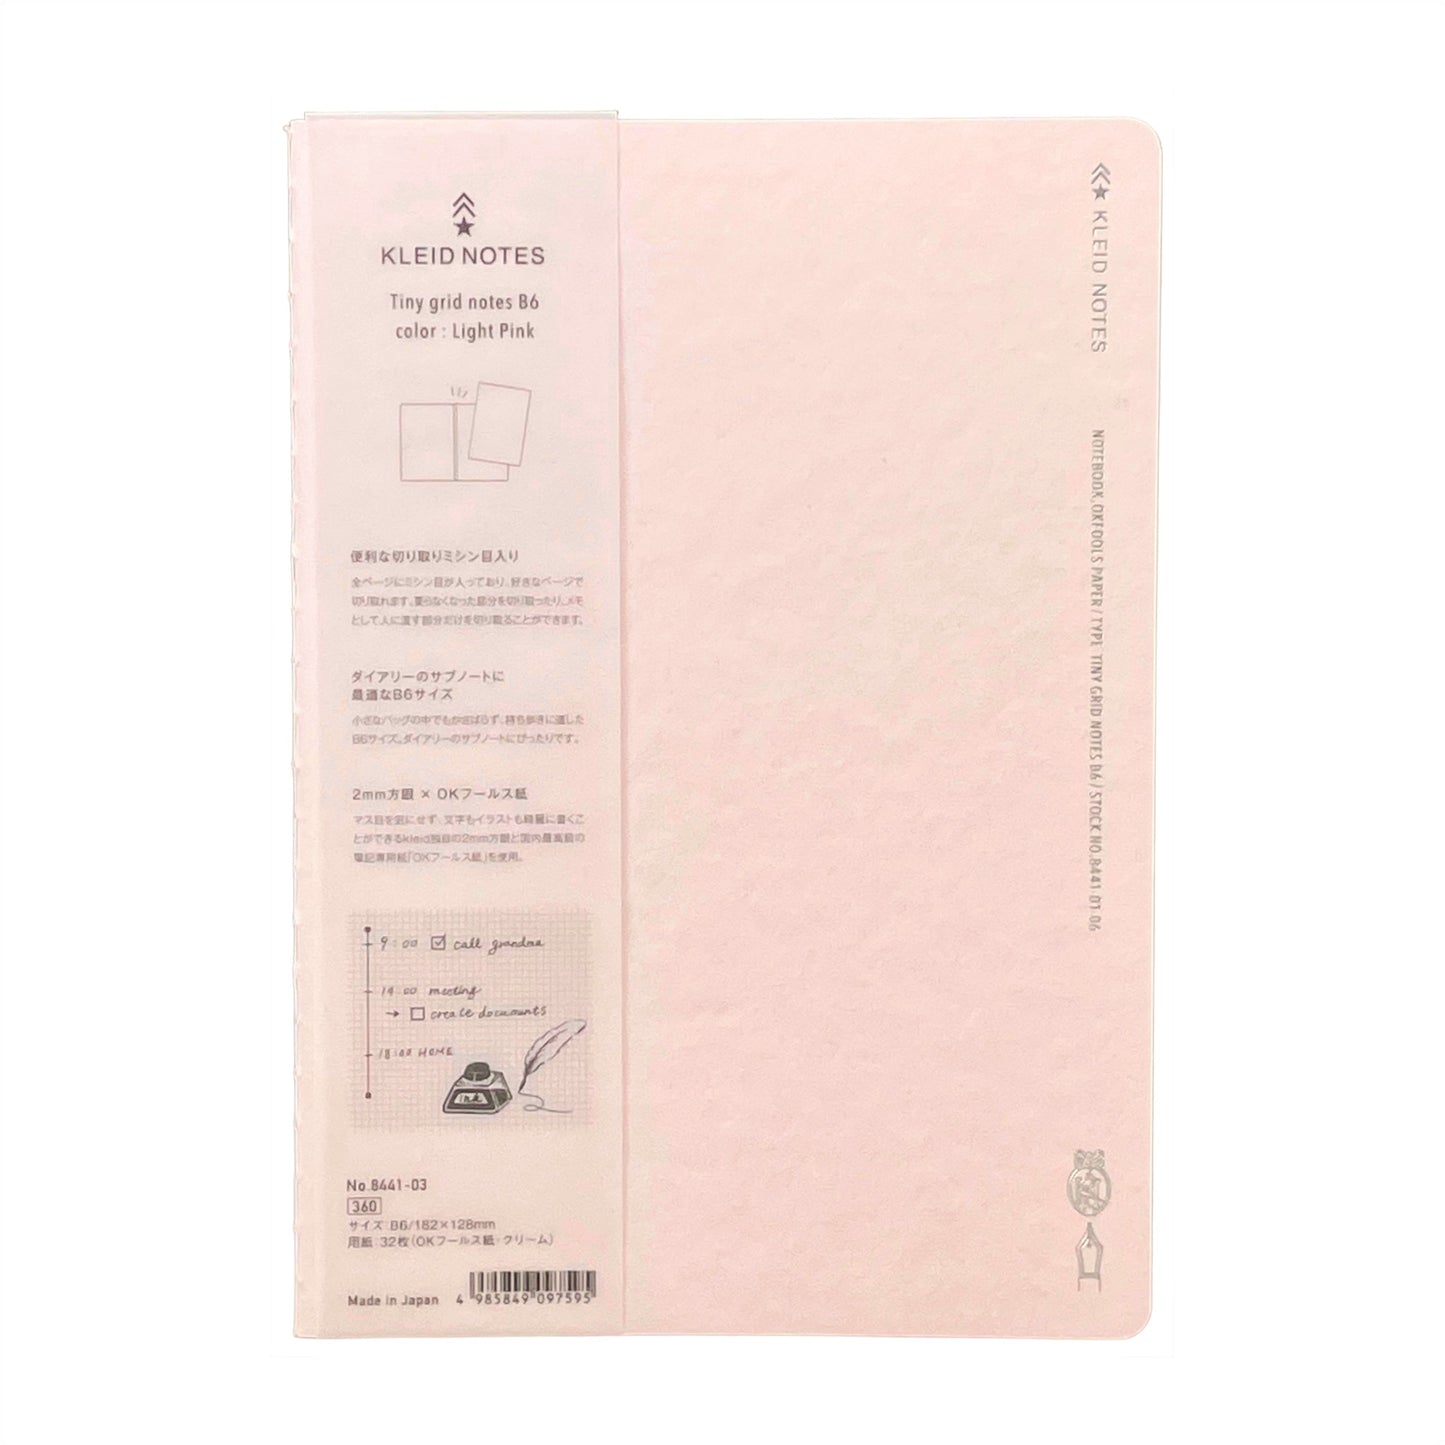 Soft cover notebook with grid format pages. Cover is plain light pink with branded belly band